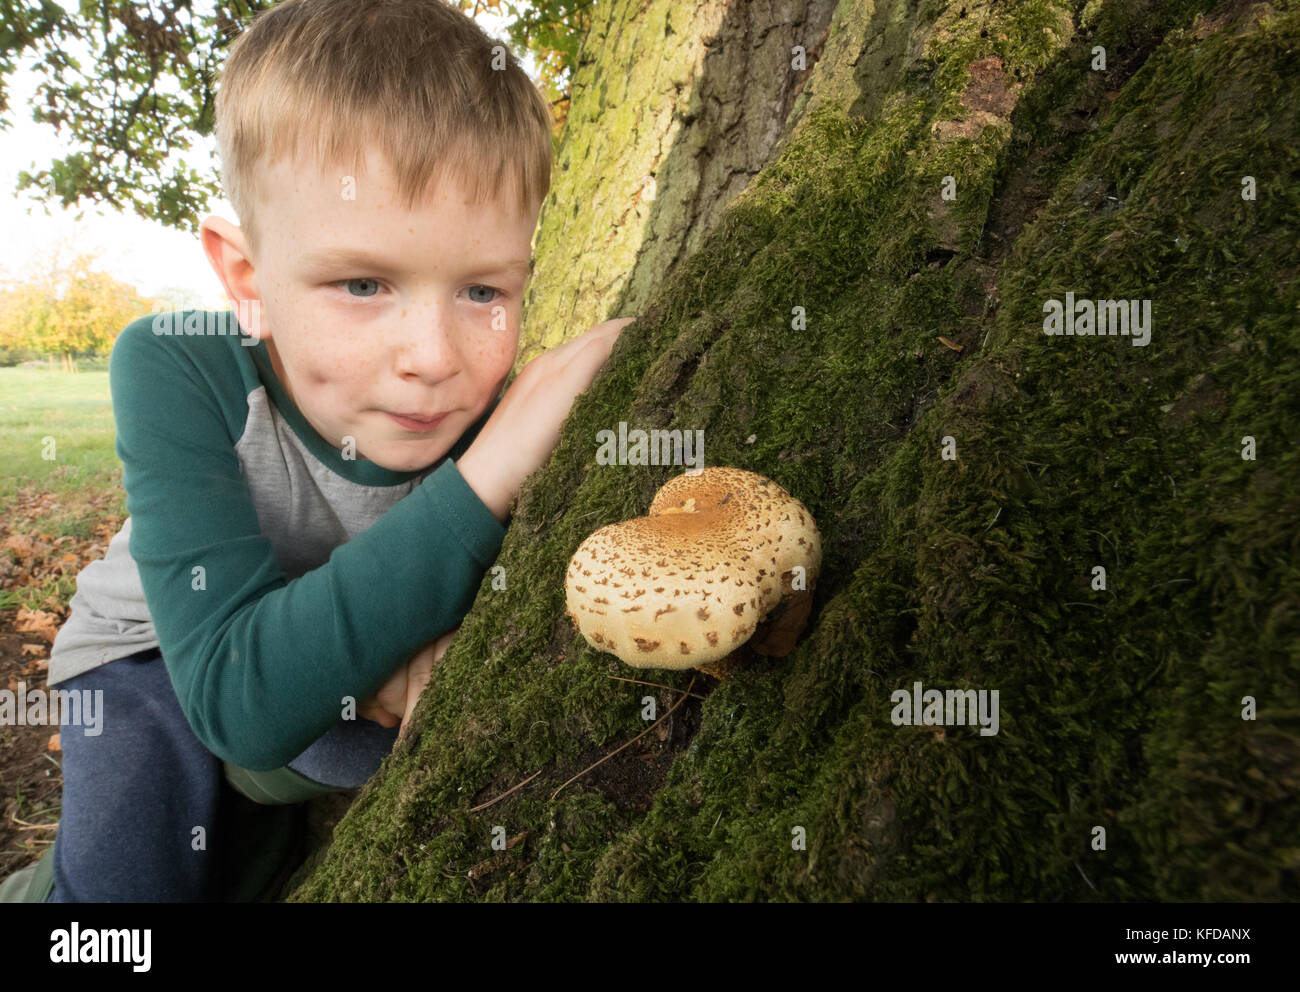 Child examining a fungus growing on a tree in English parkland. Stock Photo